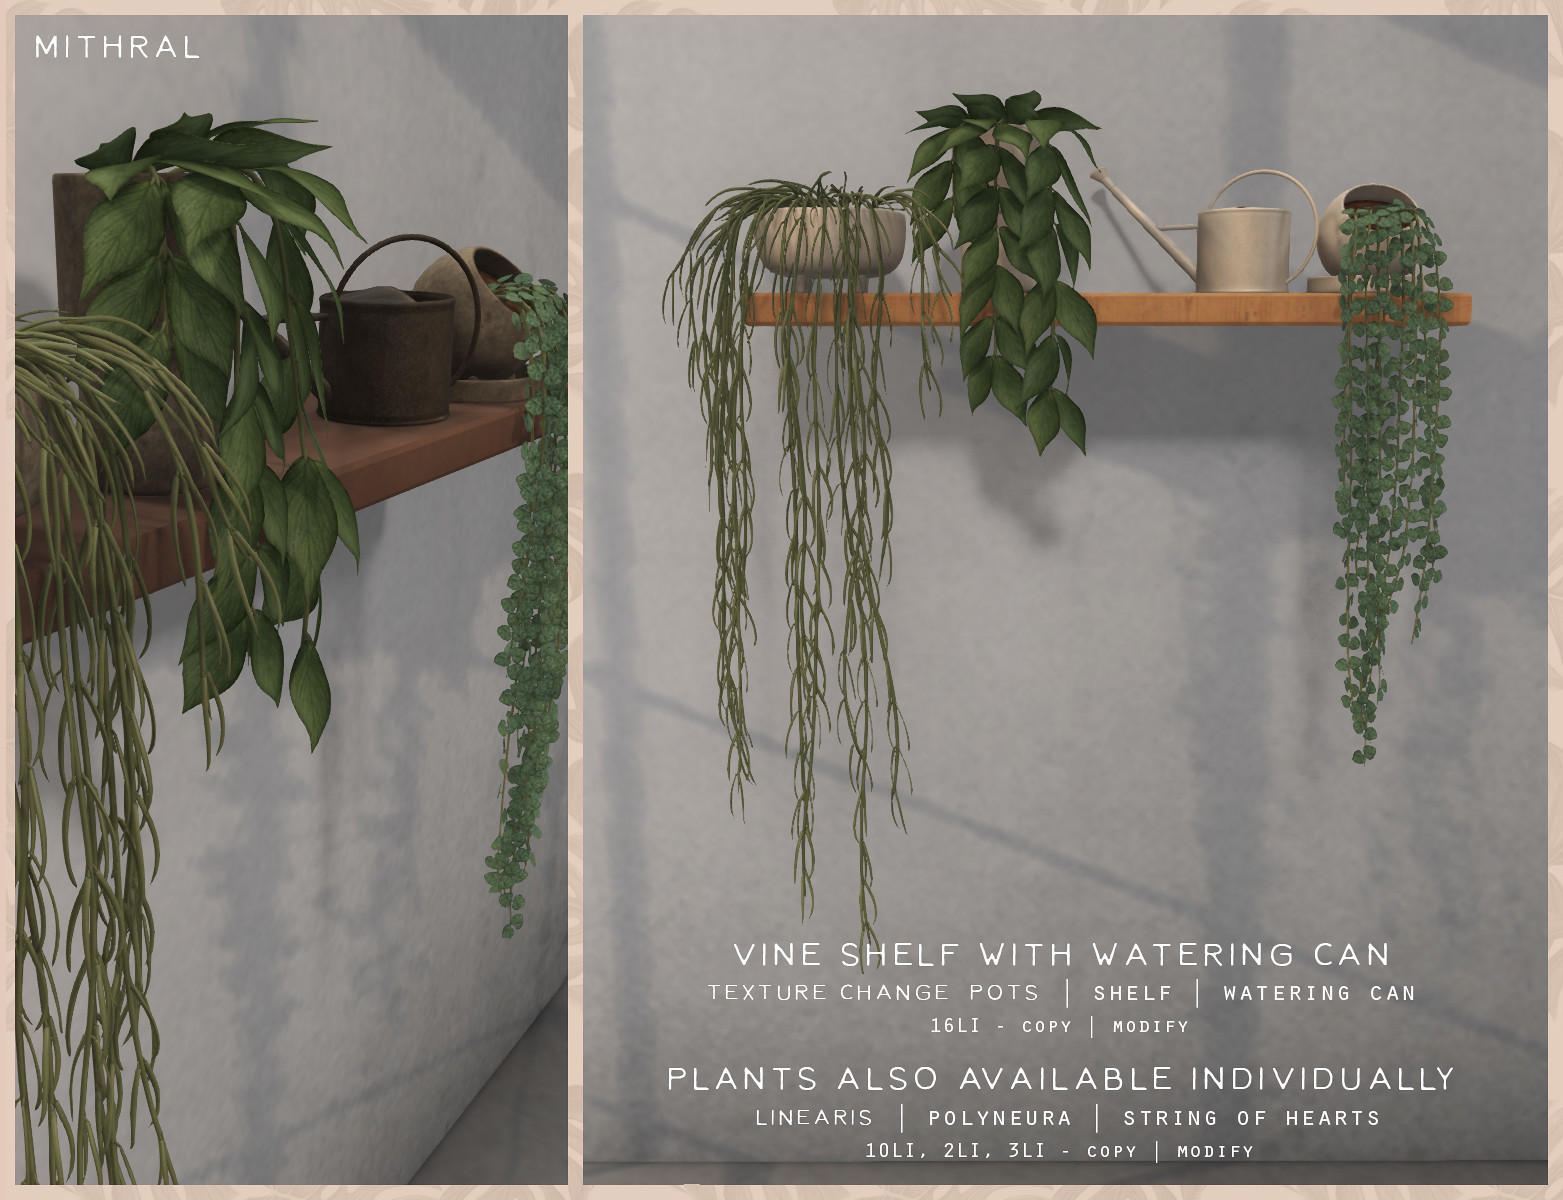 Mithral Apothecary – Vine Shelf With Watering Can